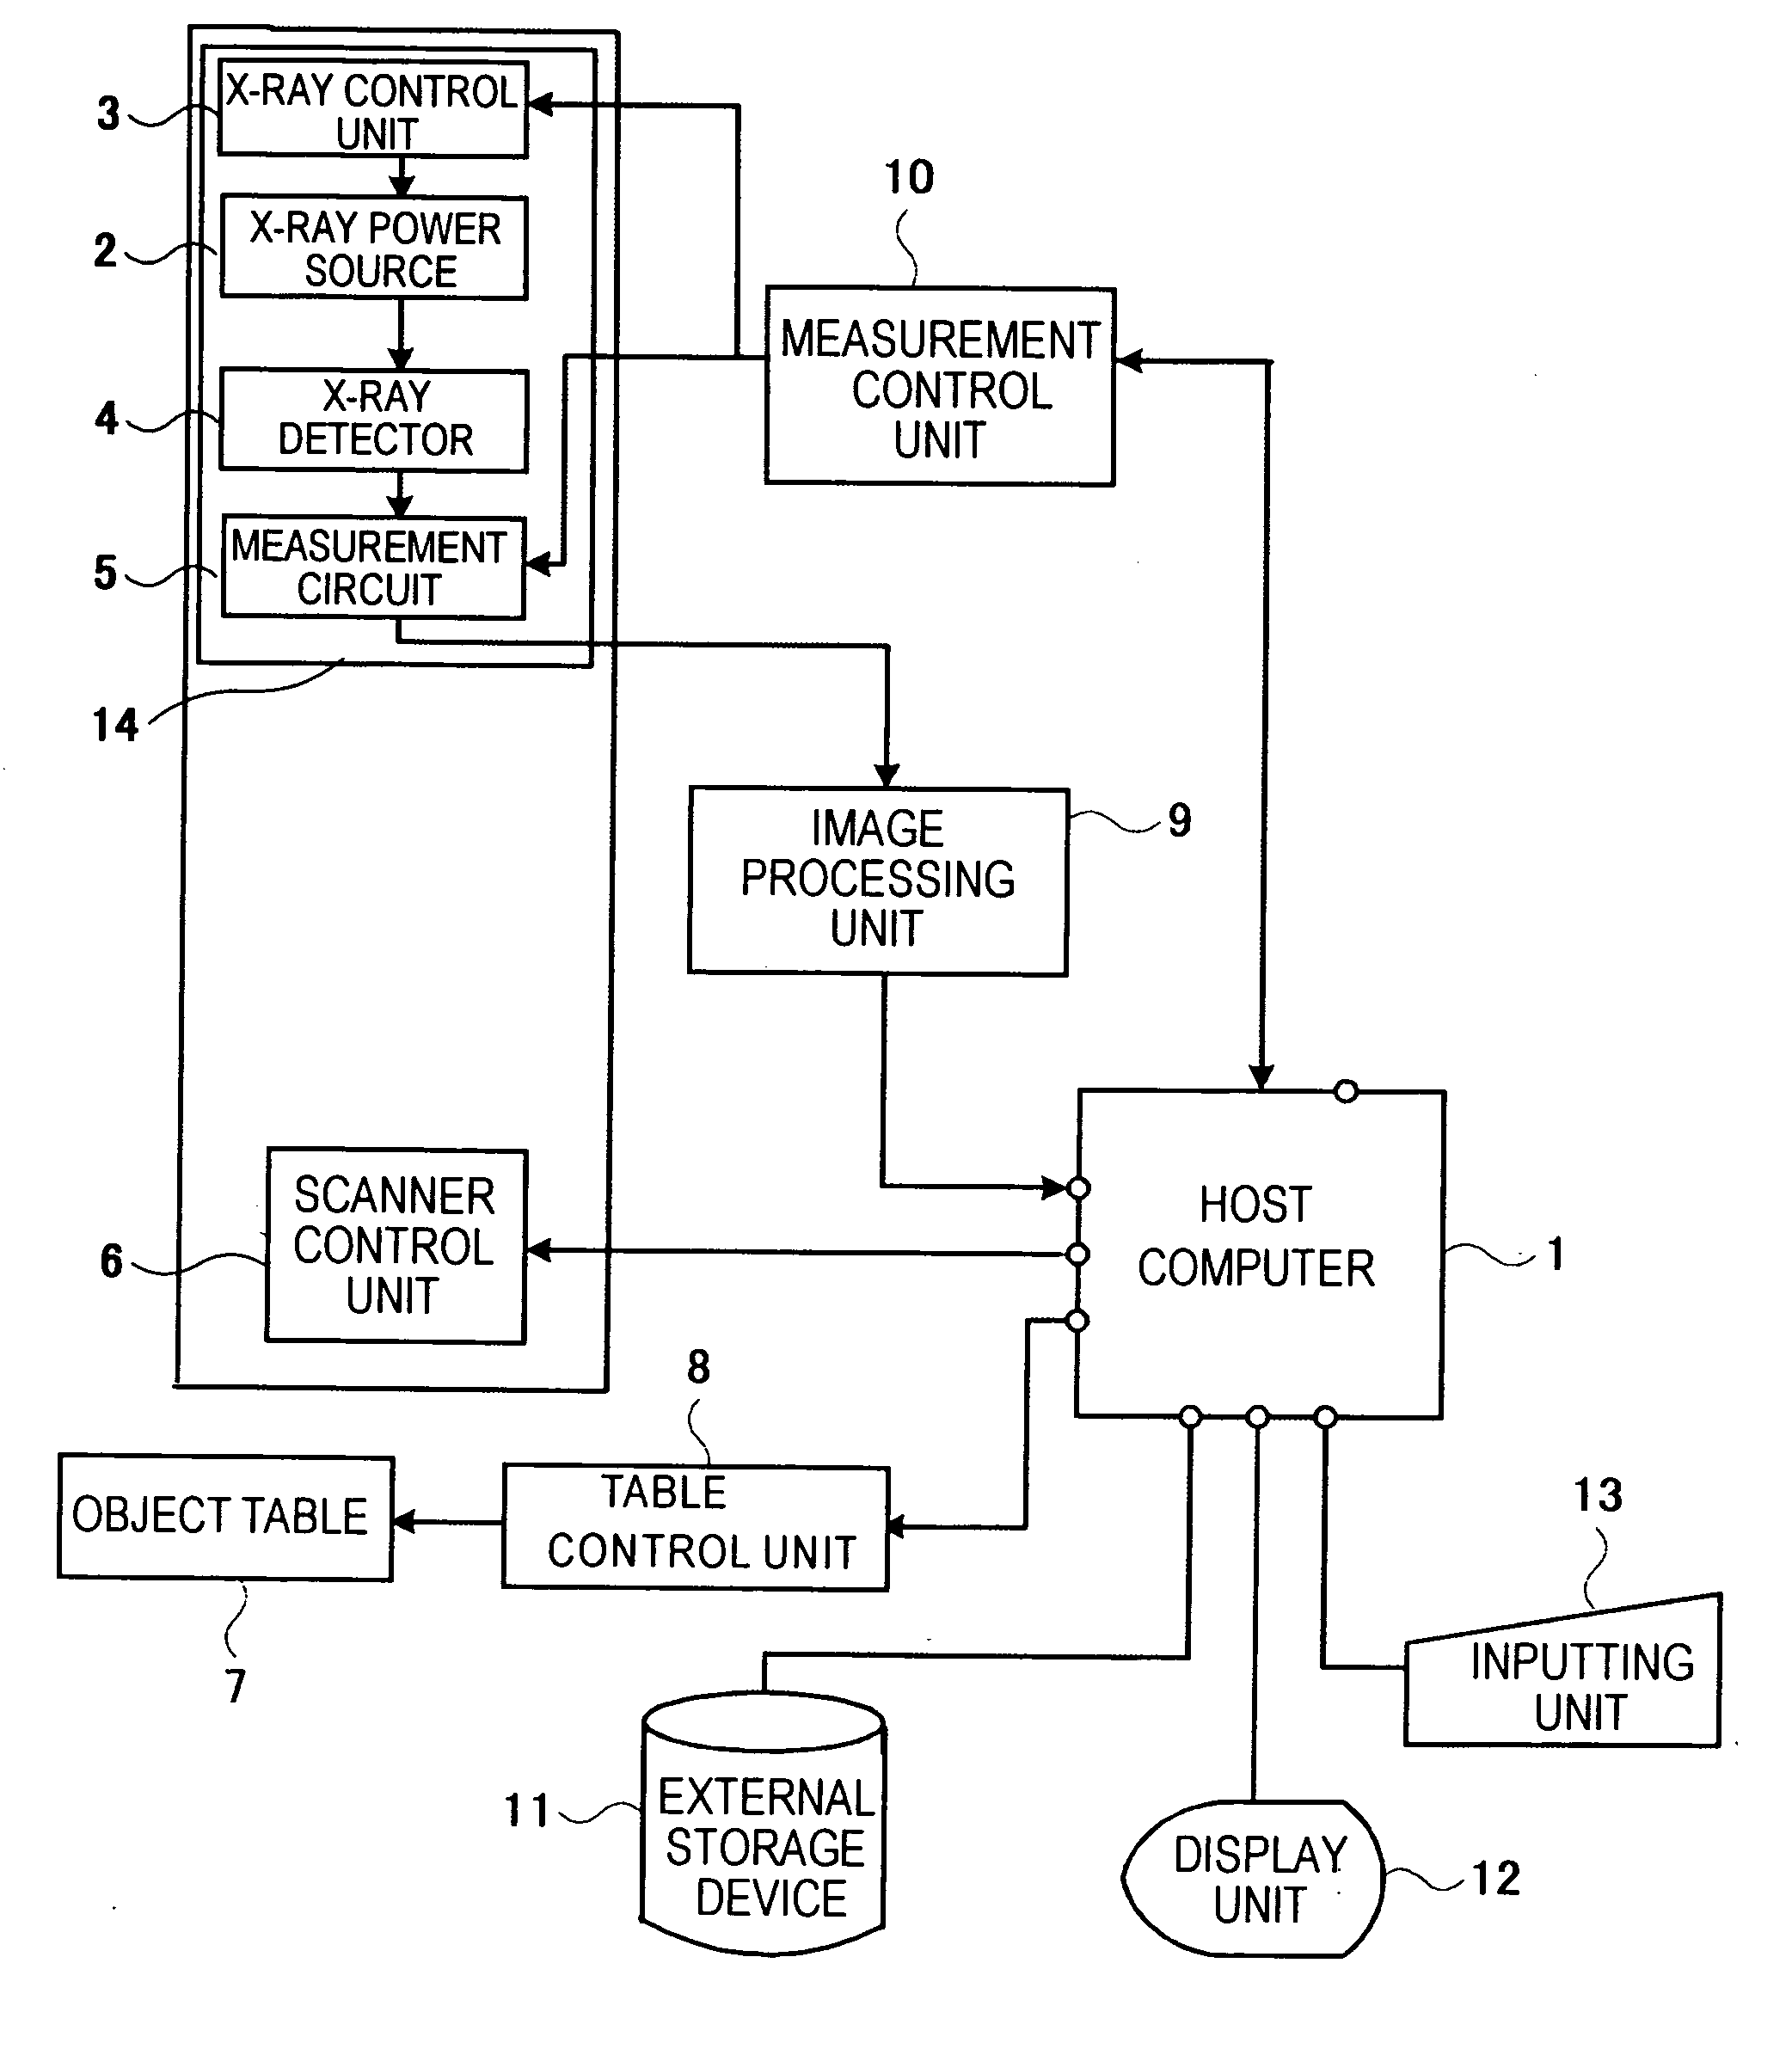 Image Processor for Medical Treatment Support